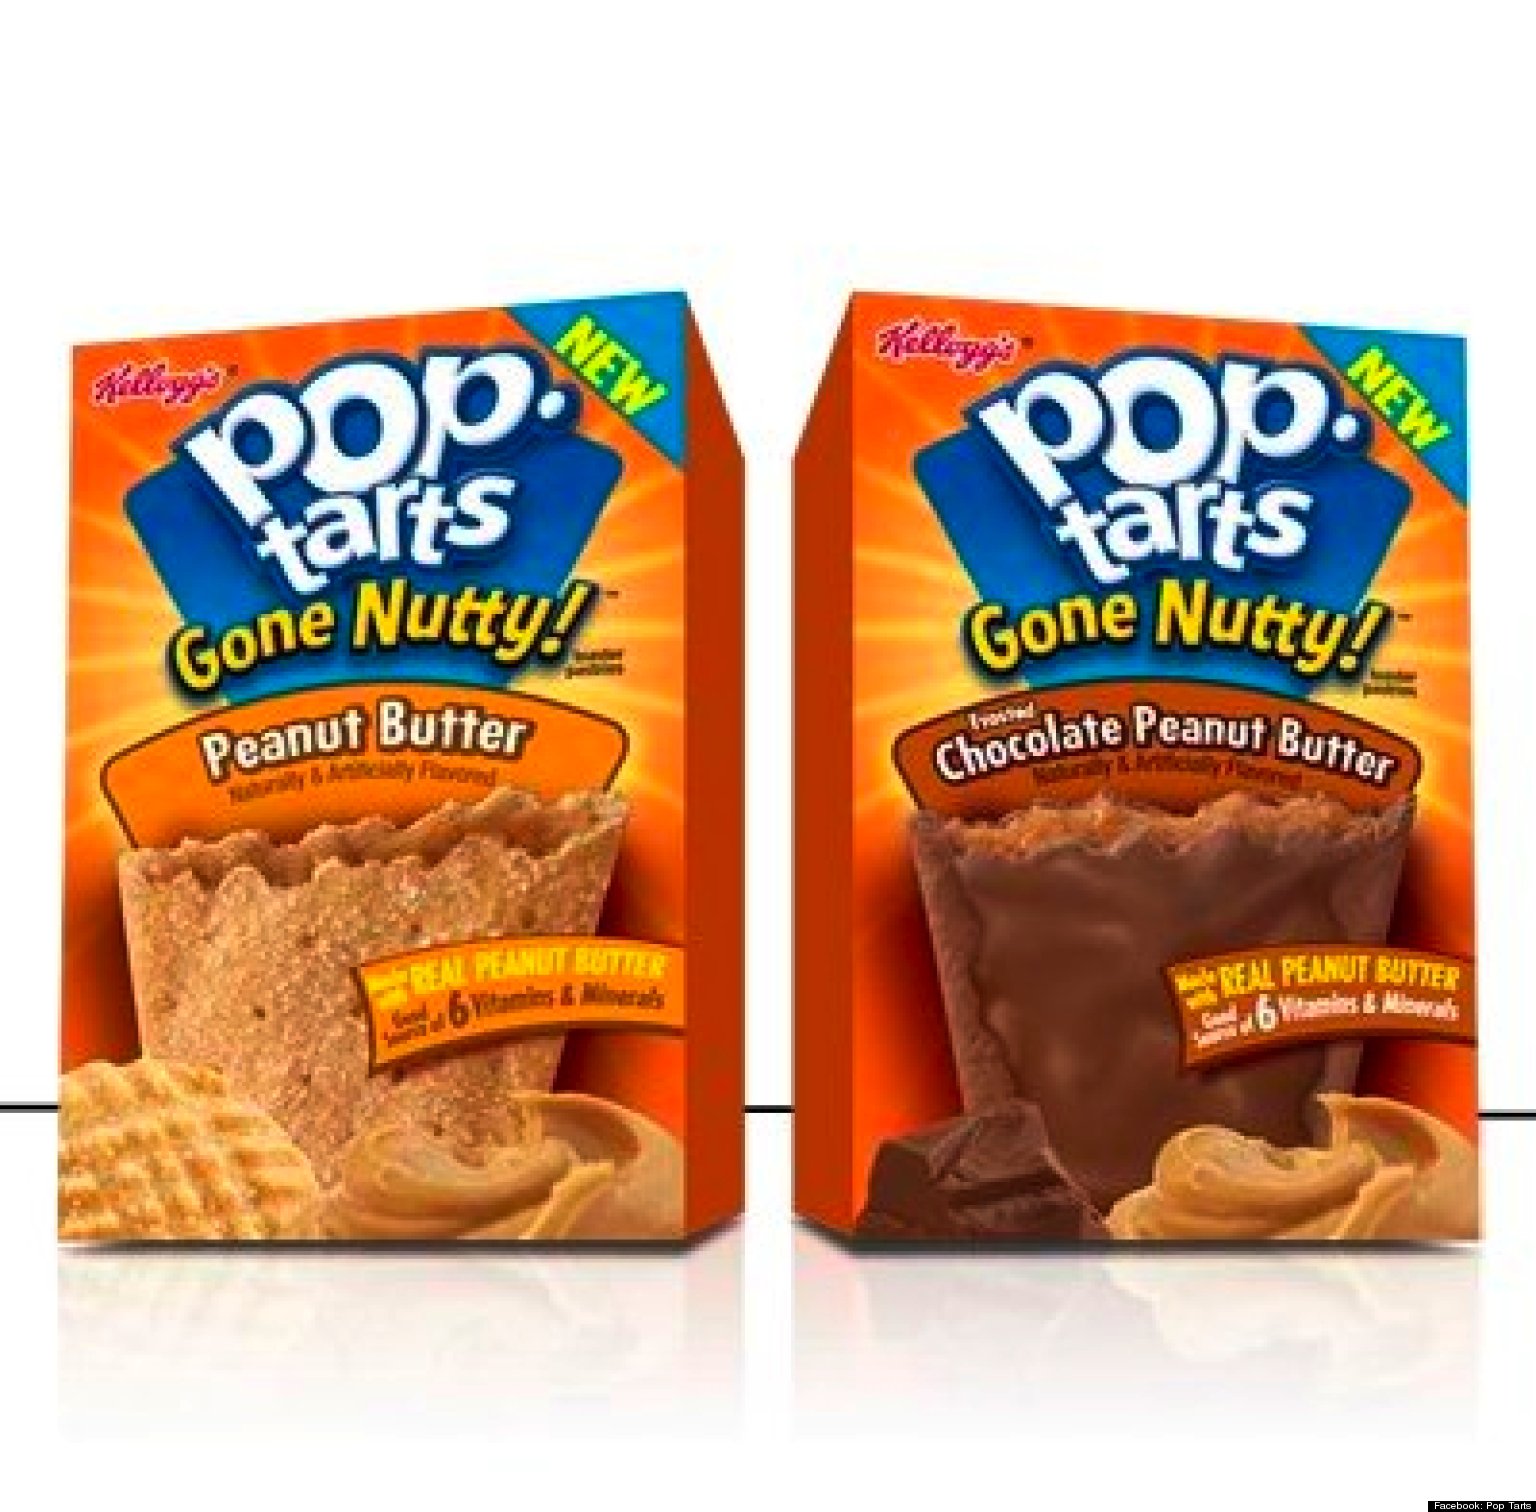 Pop-Tarts 'Gone Nutty' Debut In Peanut Butter, Frosted Chocolate Peanut ...